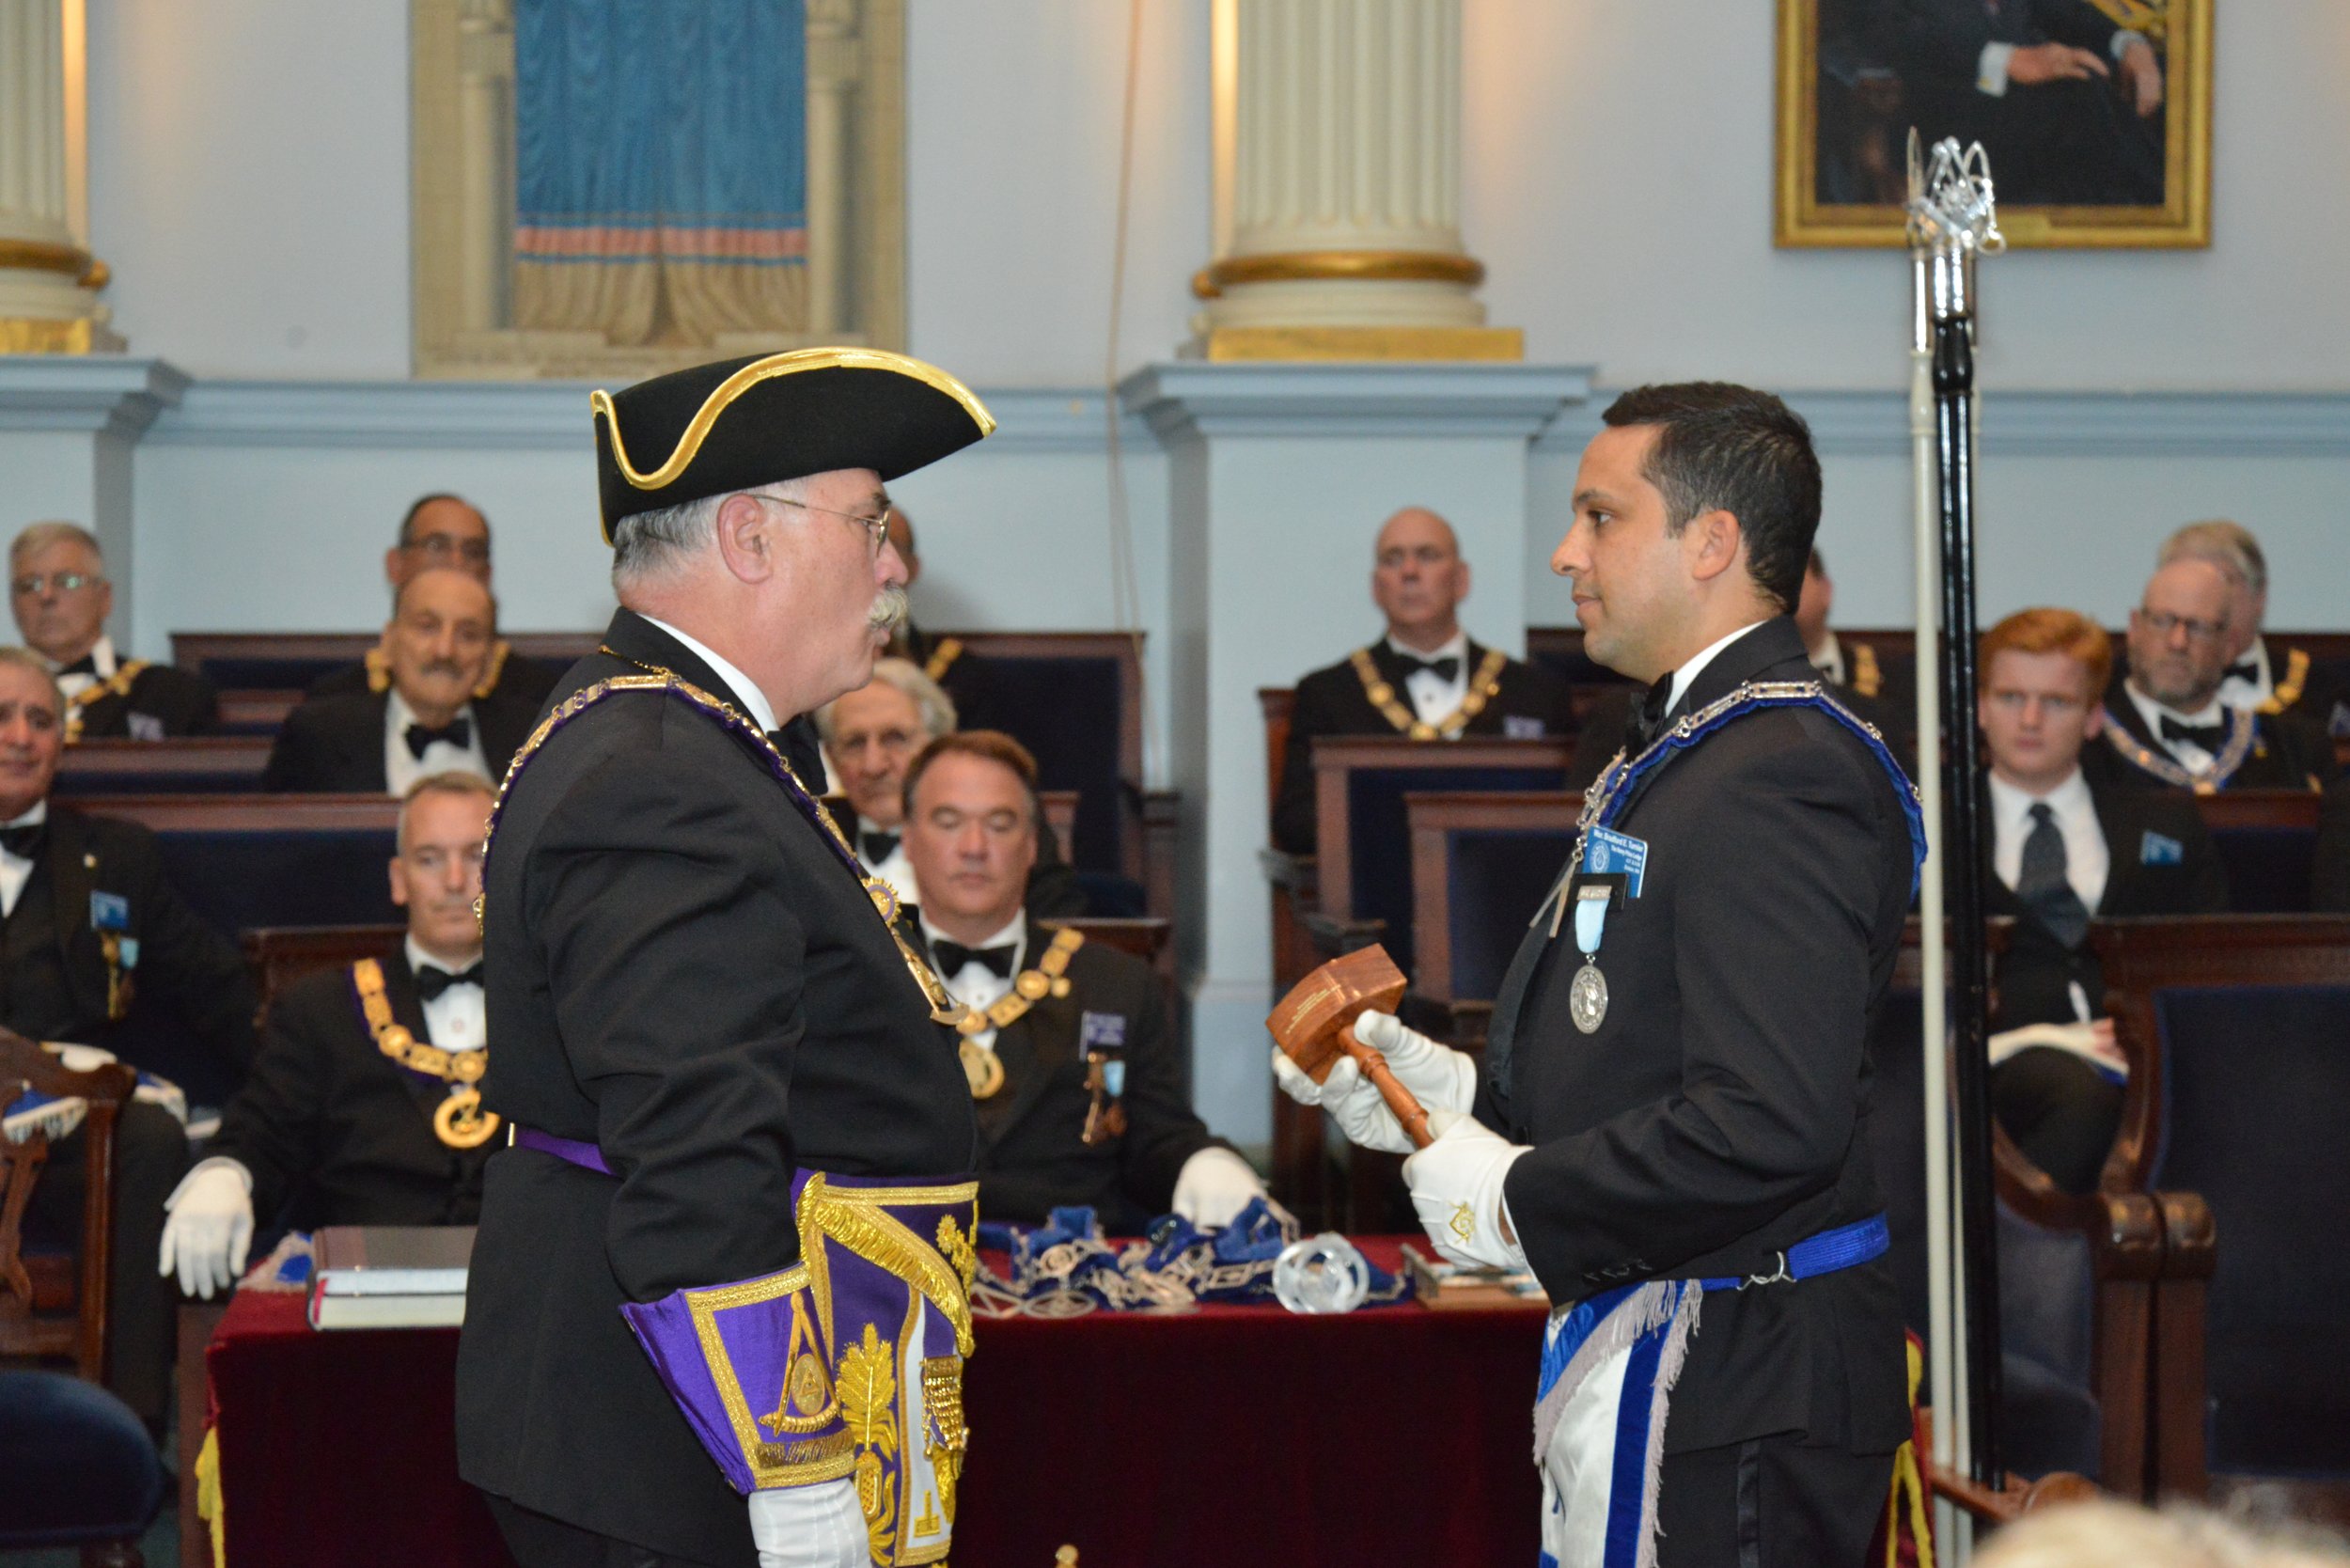  The Grand Master presented Wor. Brad Turnier with the Hiram, or gavel of authority 